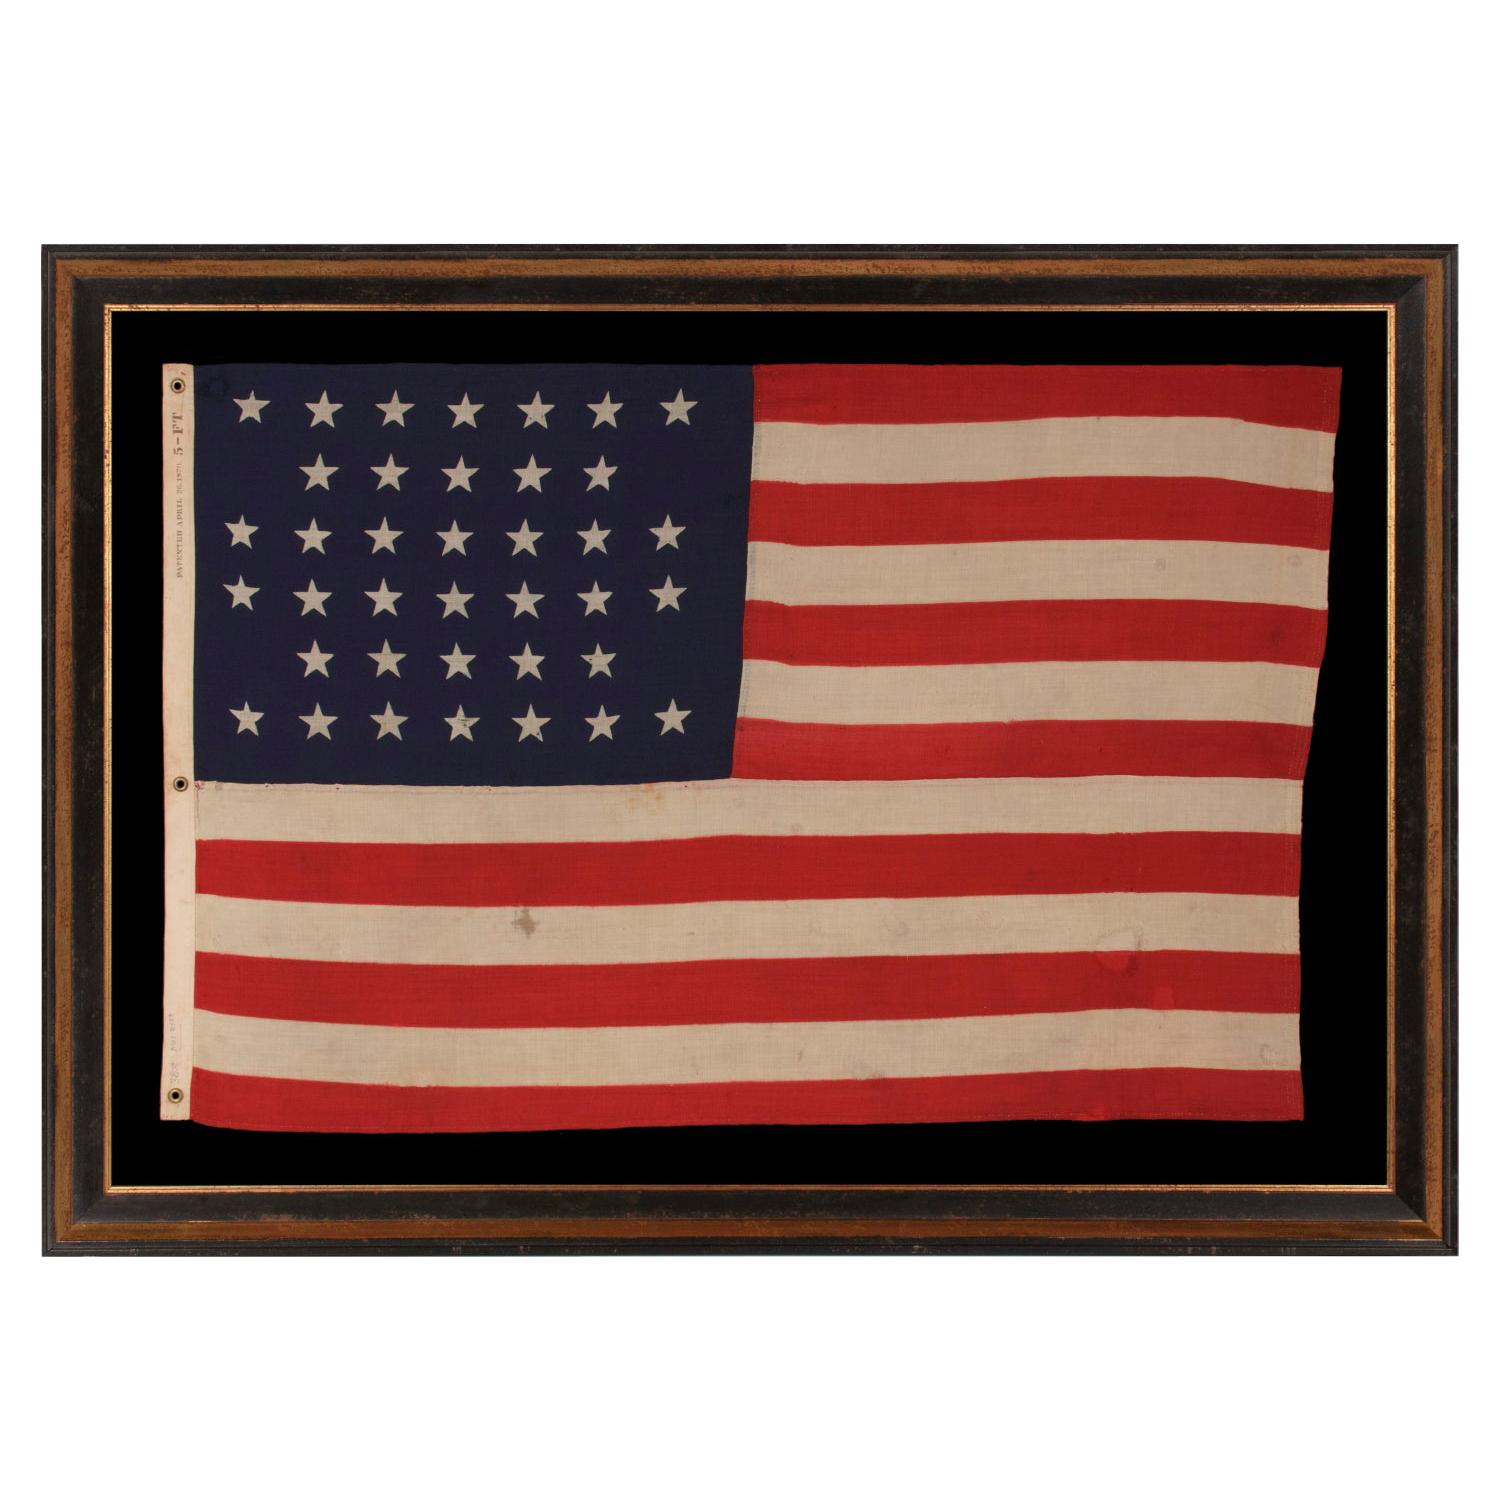 38 Star American Flag Made by U.S. Bunting Company, EX-Whitney Smith Collection